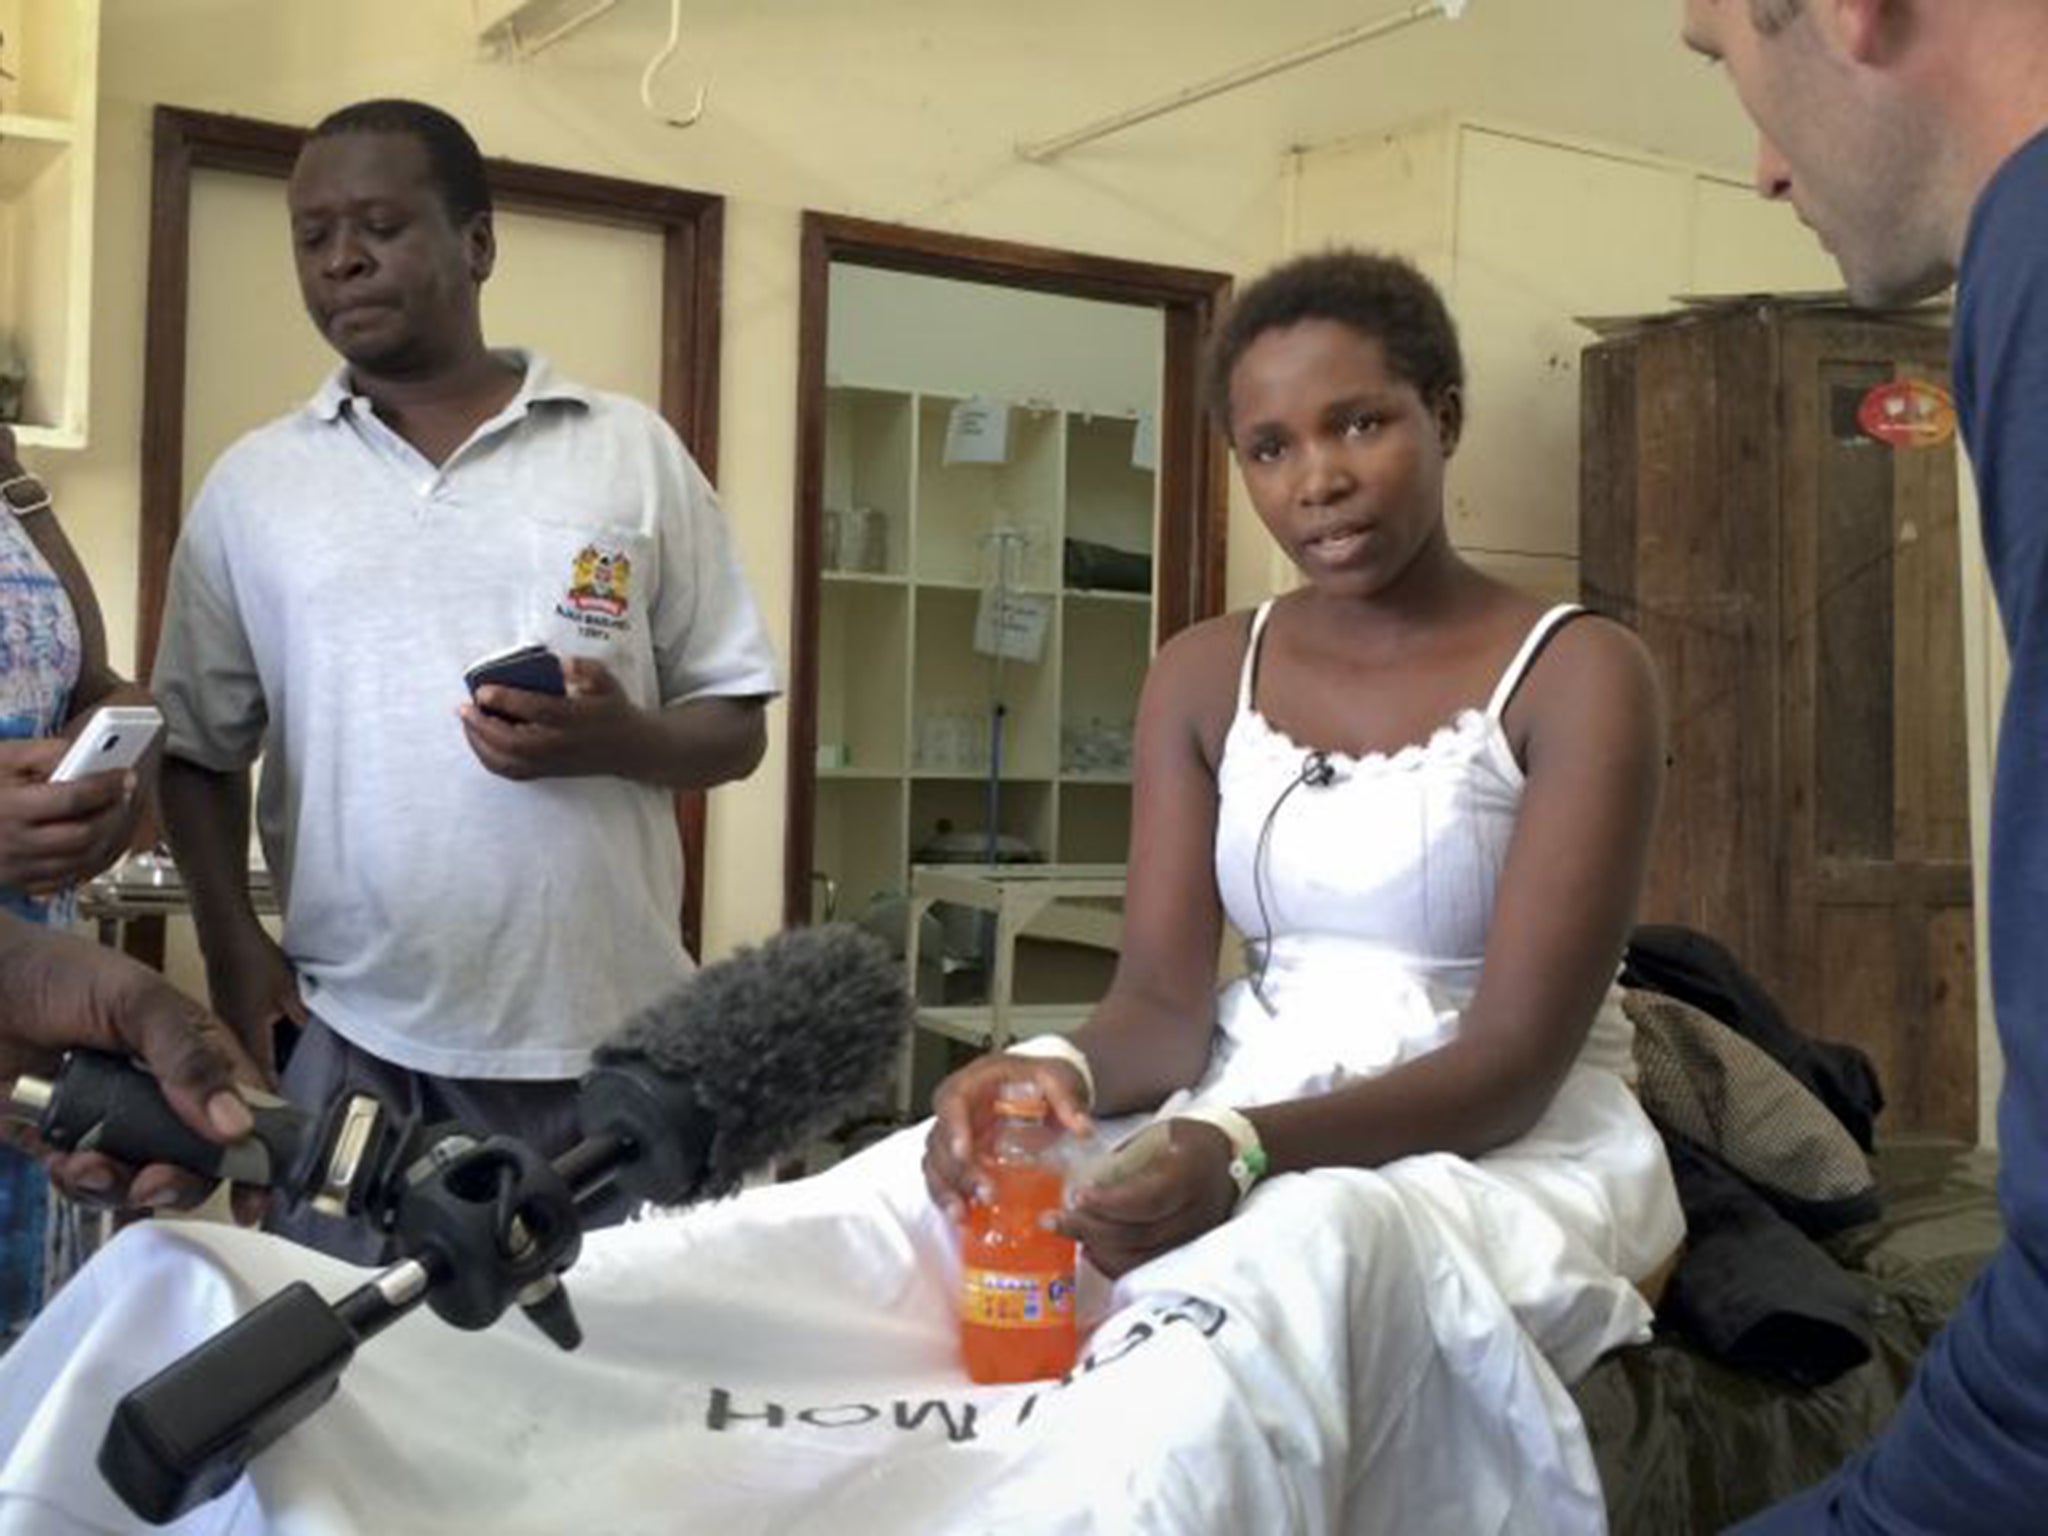 Survivor Cynthia Cheroitich says she refused to emerge from her hideout even when some of her classmates obeyed the demands of the gunmen